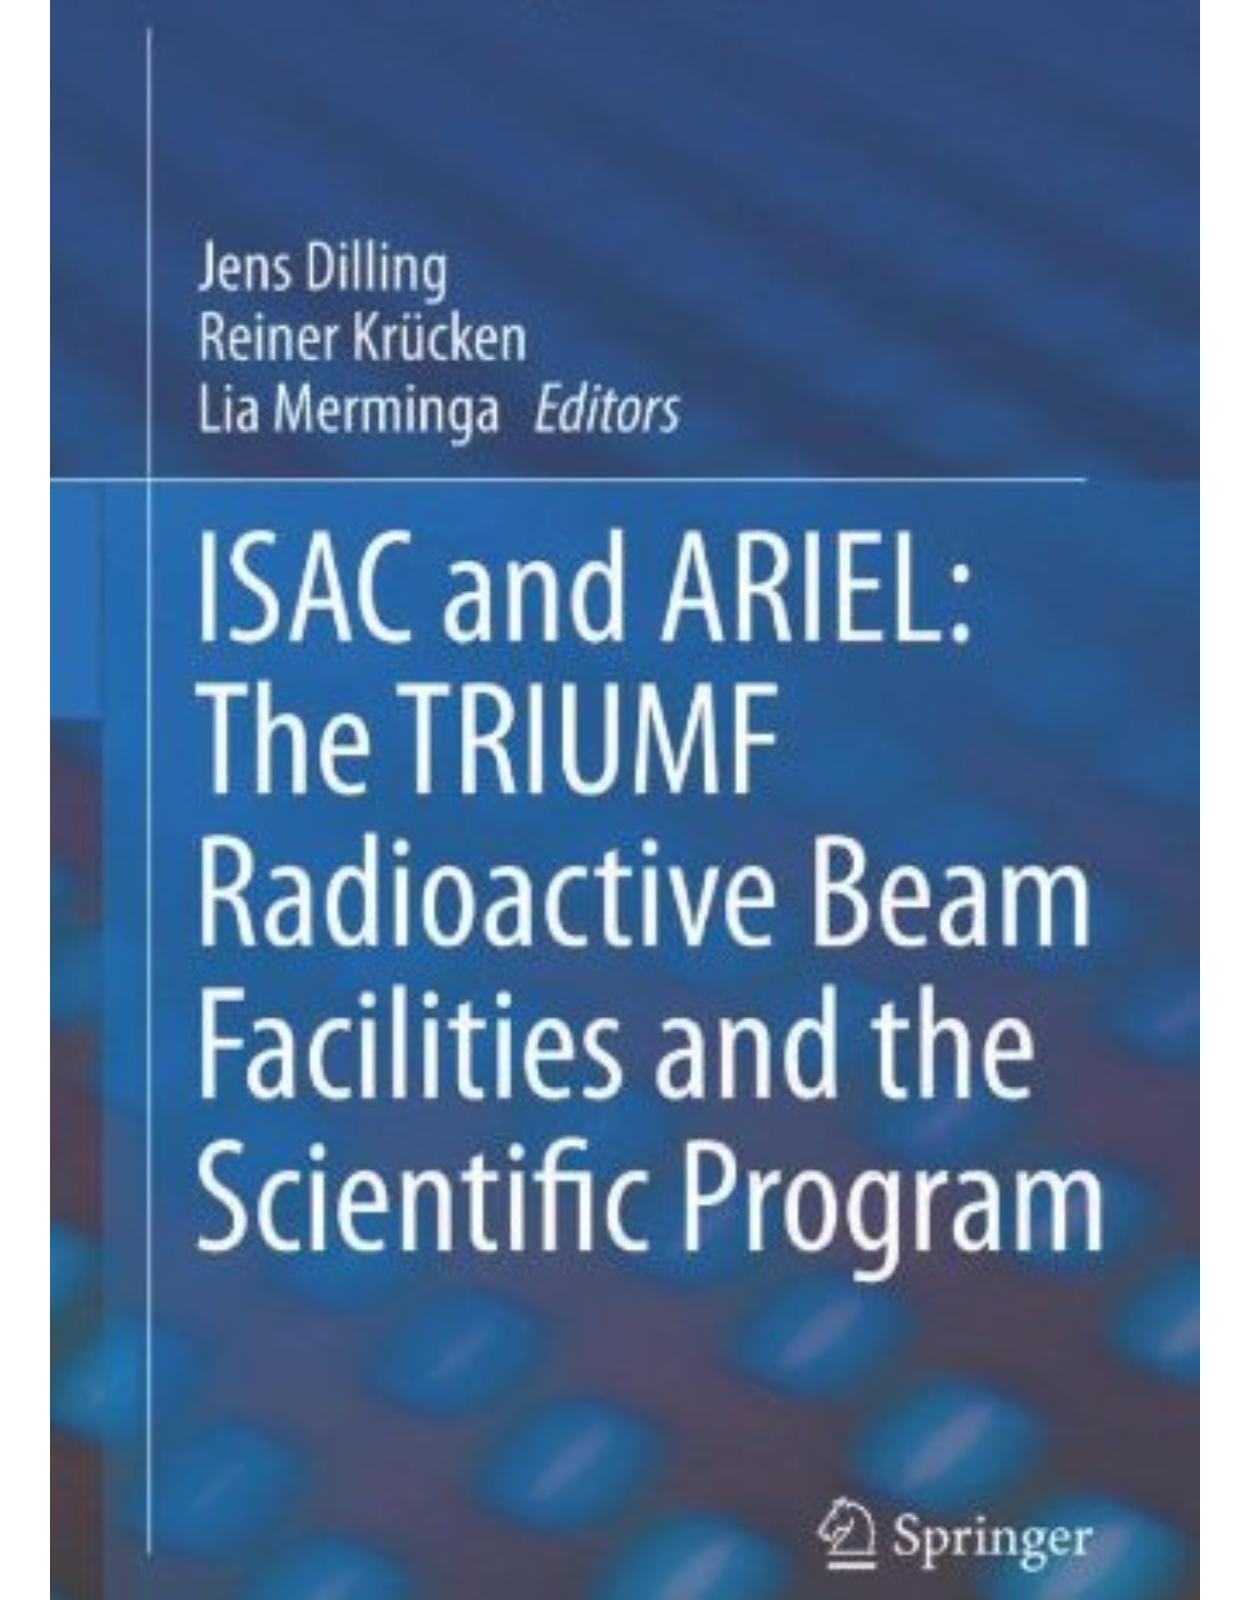 ISAC and ARIEL: The TRIUMF Radioactive Beam Facilities and the Scientific Program